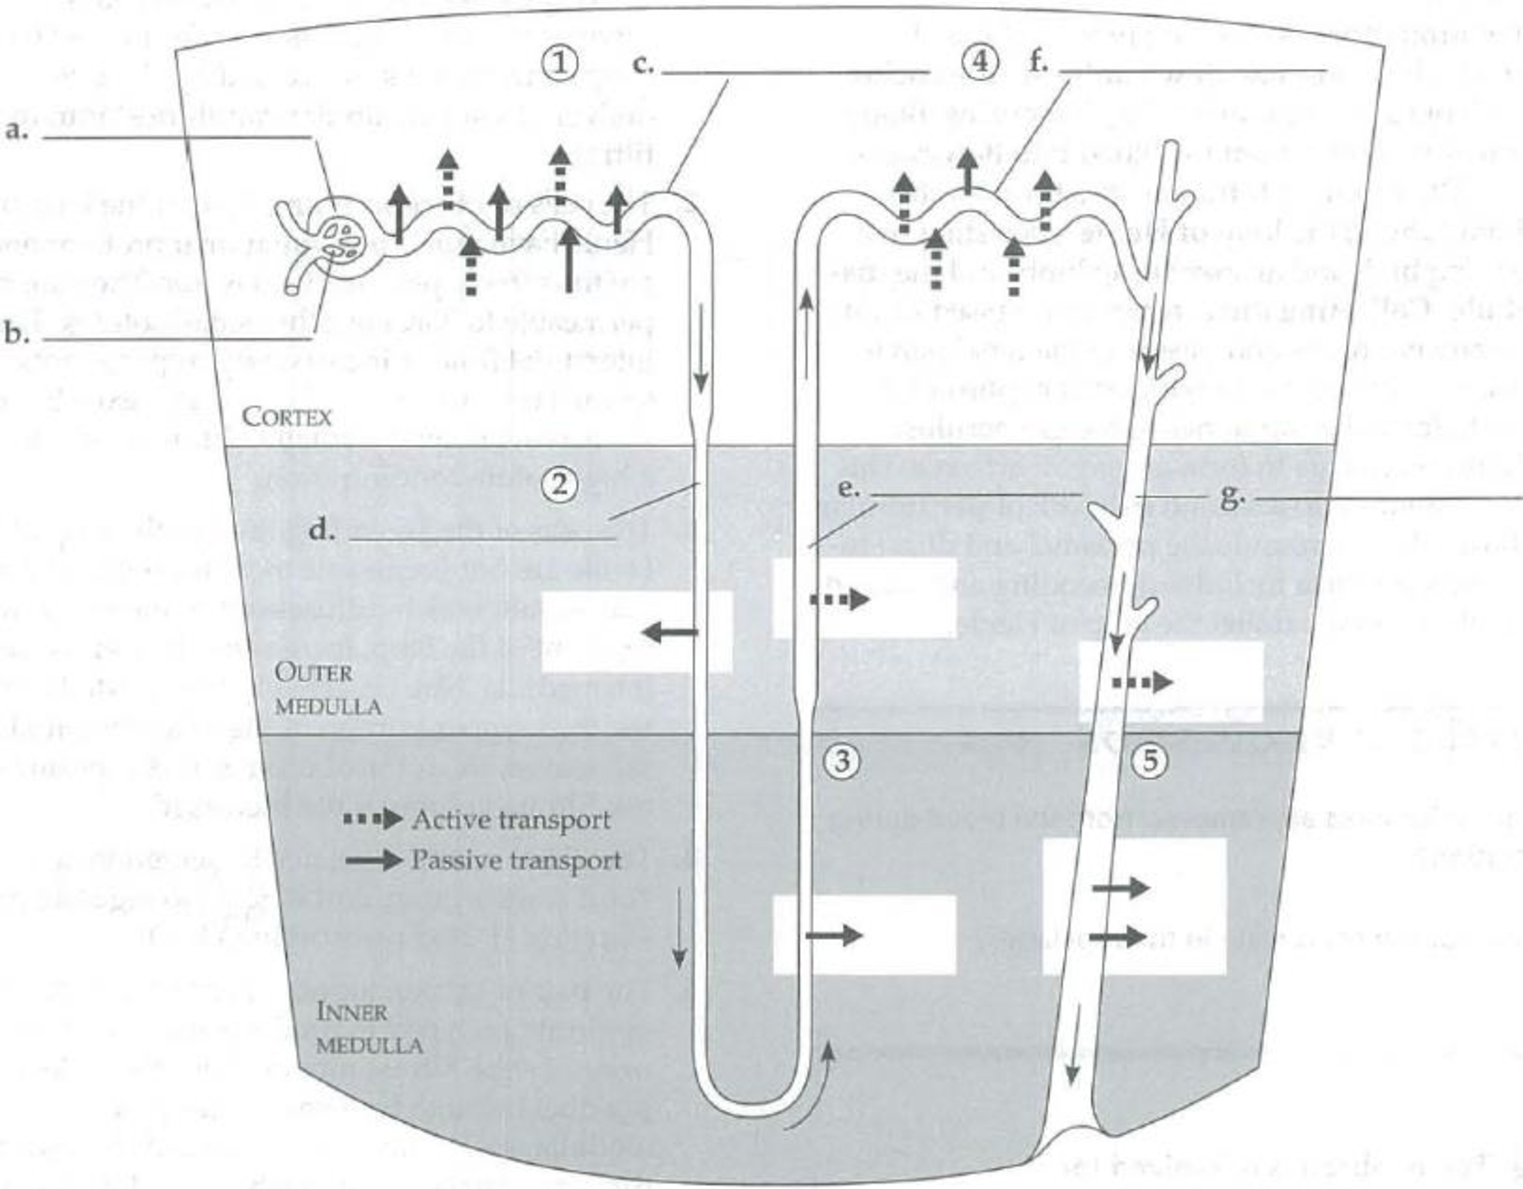 Chapter 44, Problem 5IQ, In the following diagram of a nephron and collecting duct, label the parts on the indicated lines. 